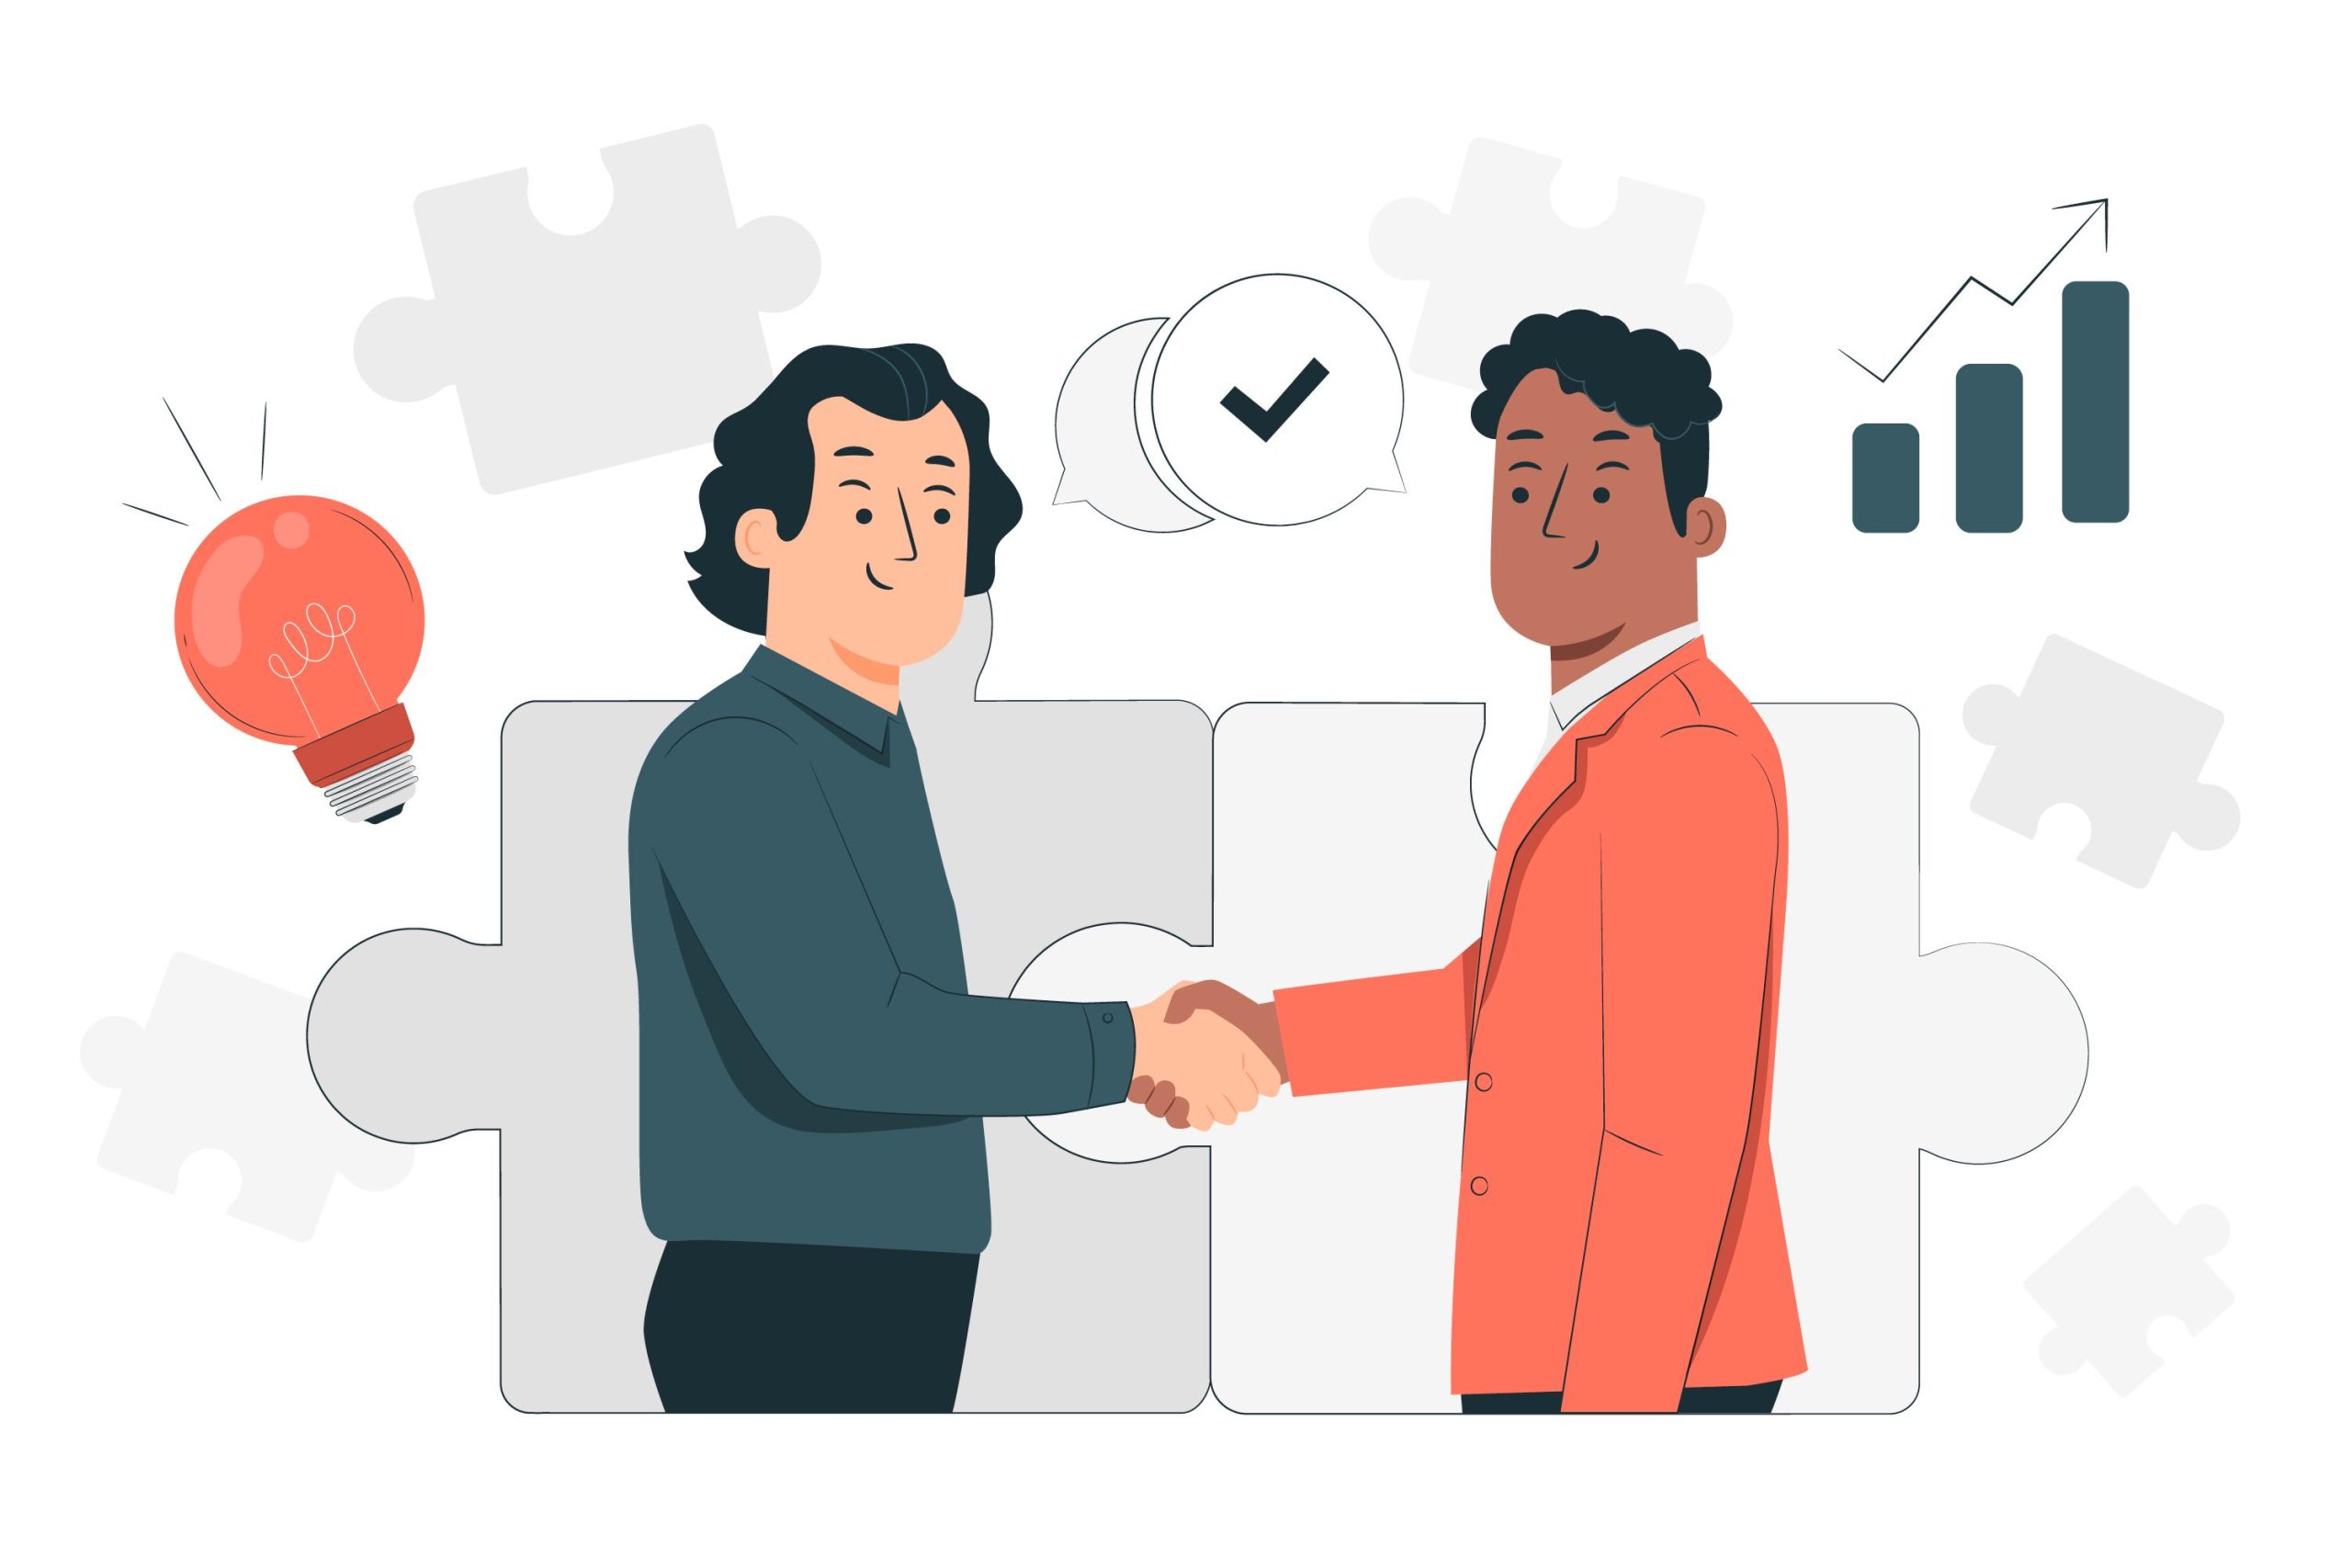 Two people shaking hands, a symbol of trust in remote team culture.